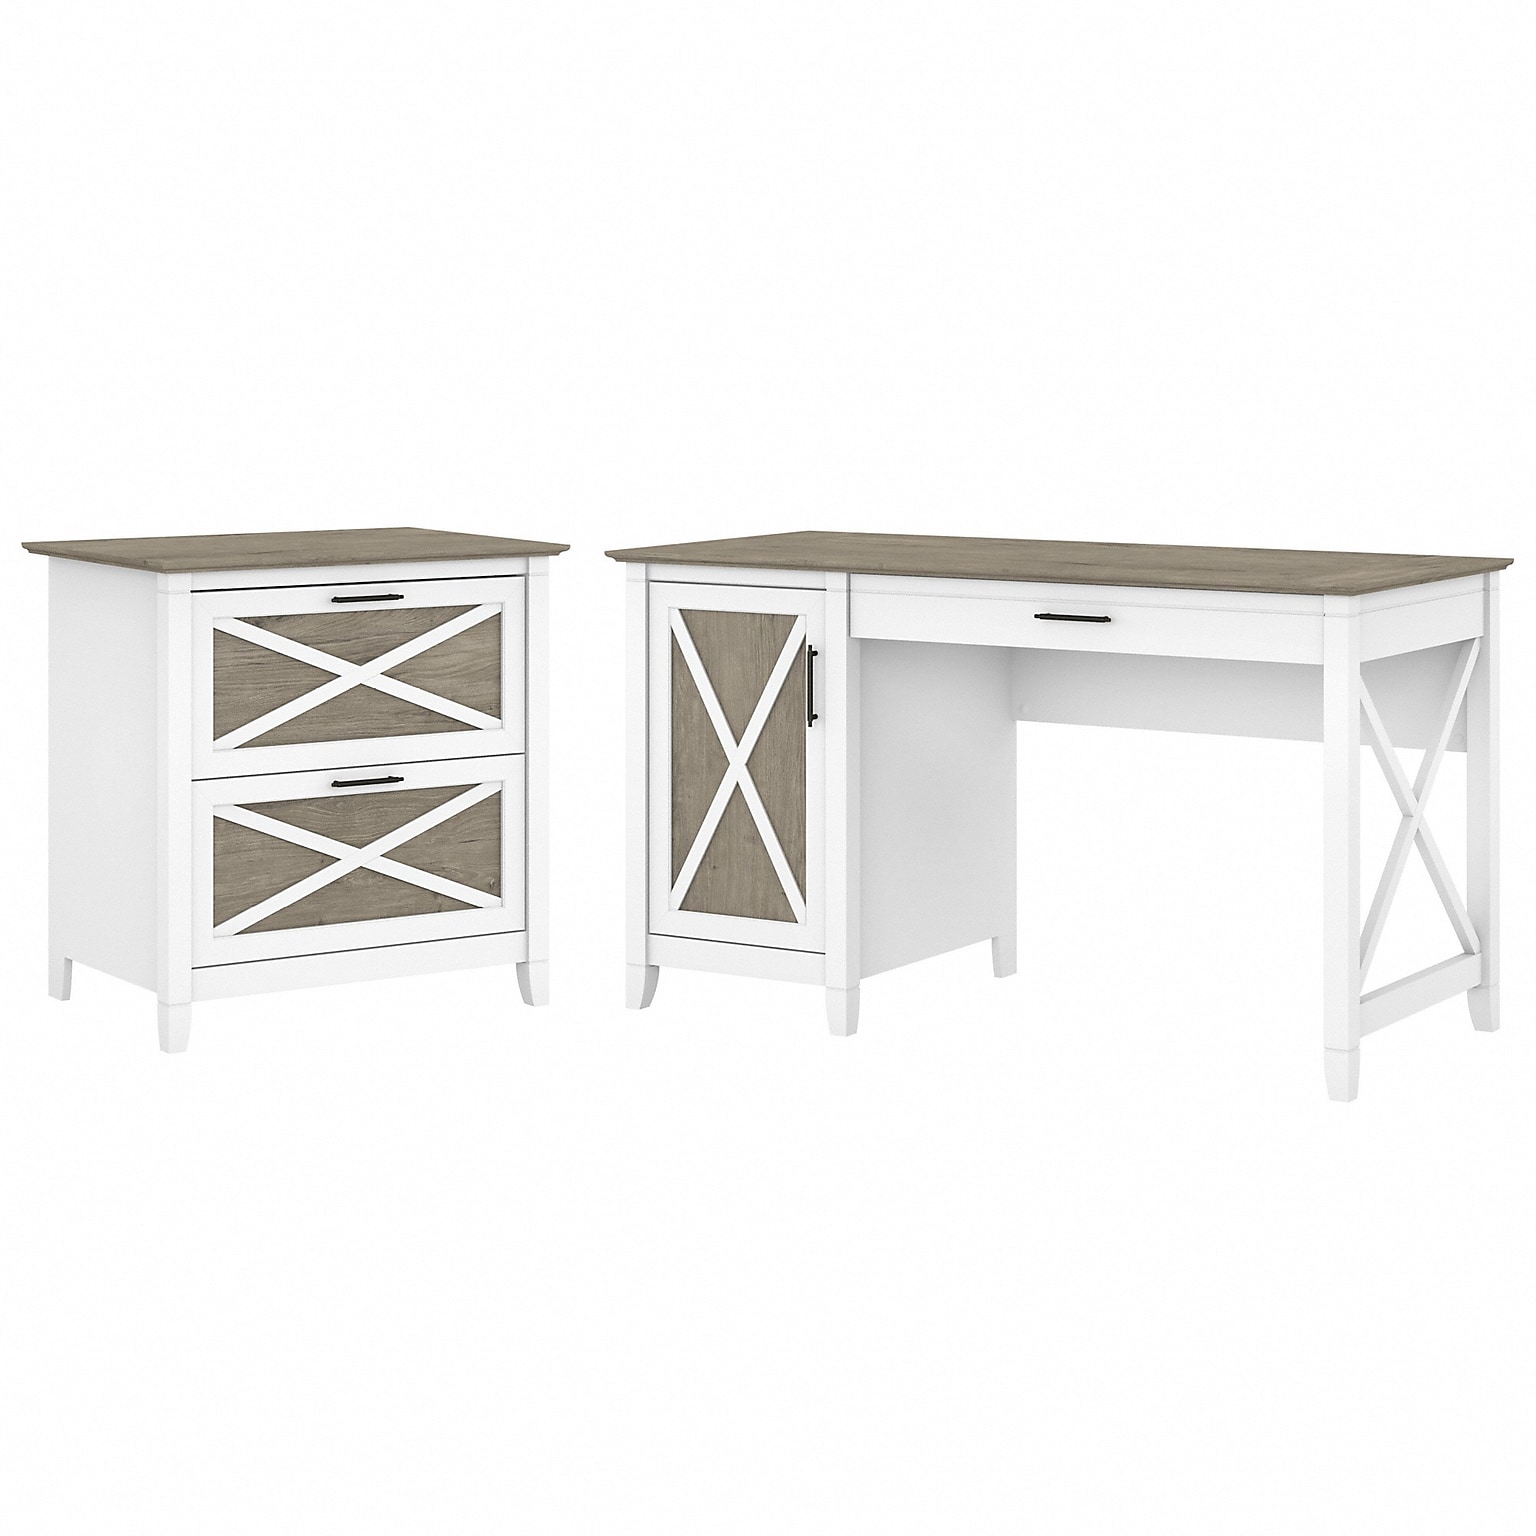 Bush Furniture Key West 54W Computer Desk with Storage and 2-Drawer Lateral File Cabinet, Shiplap Gray/Pure White (KWS008G2W)